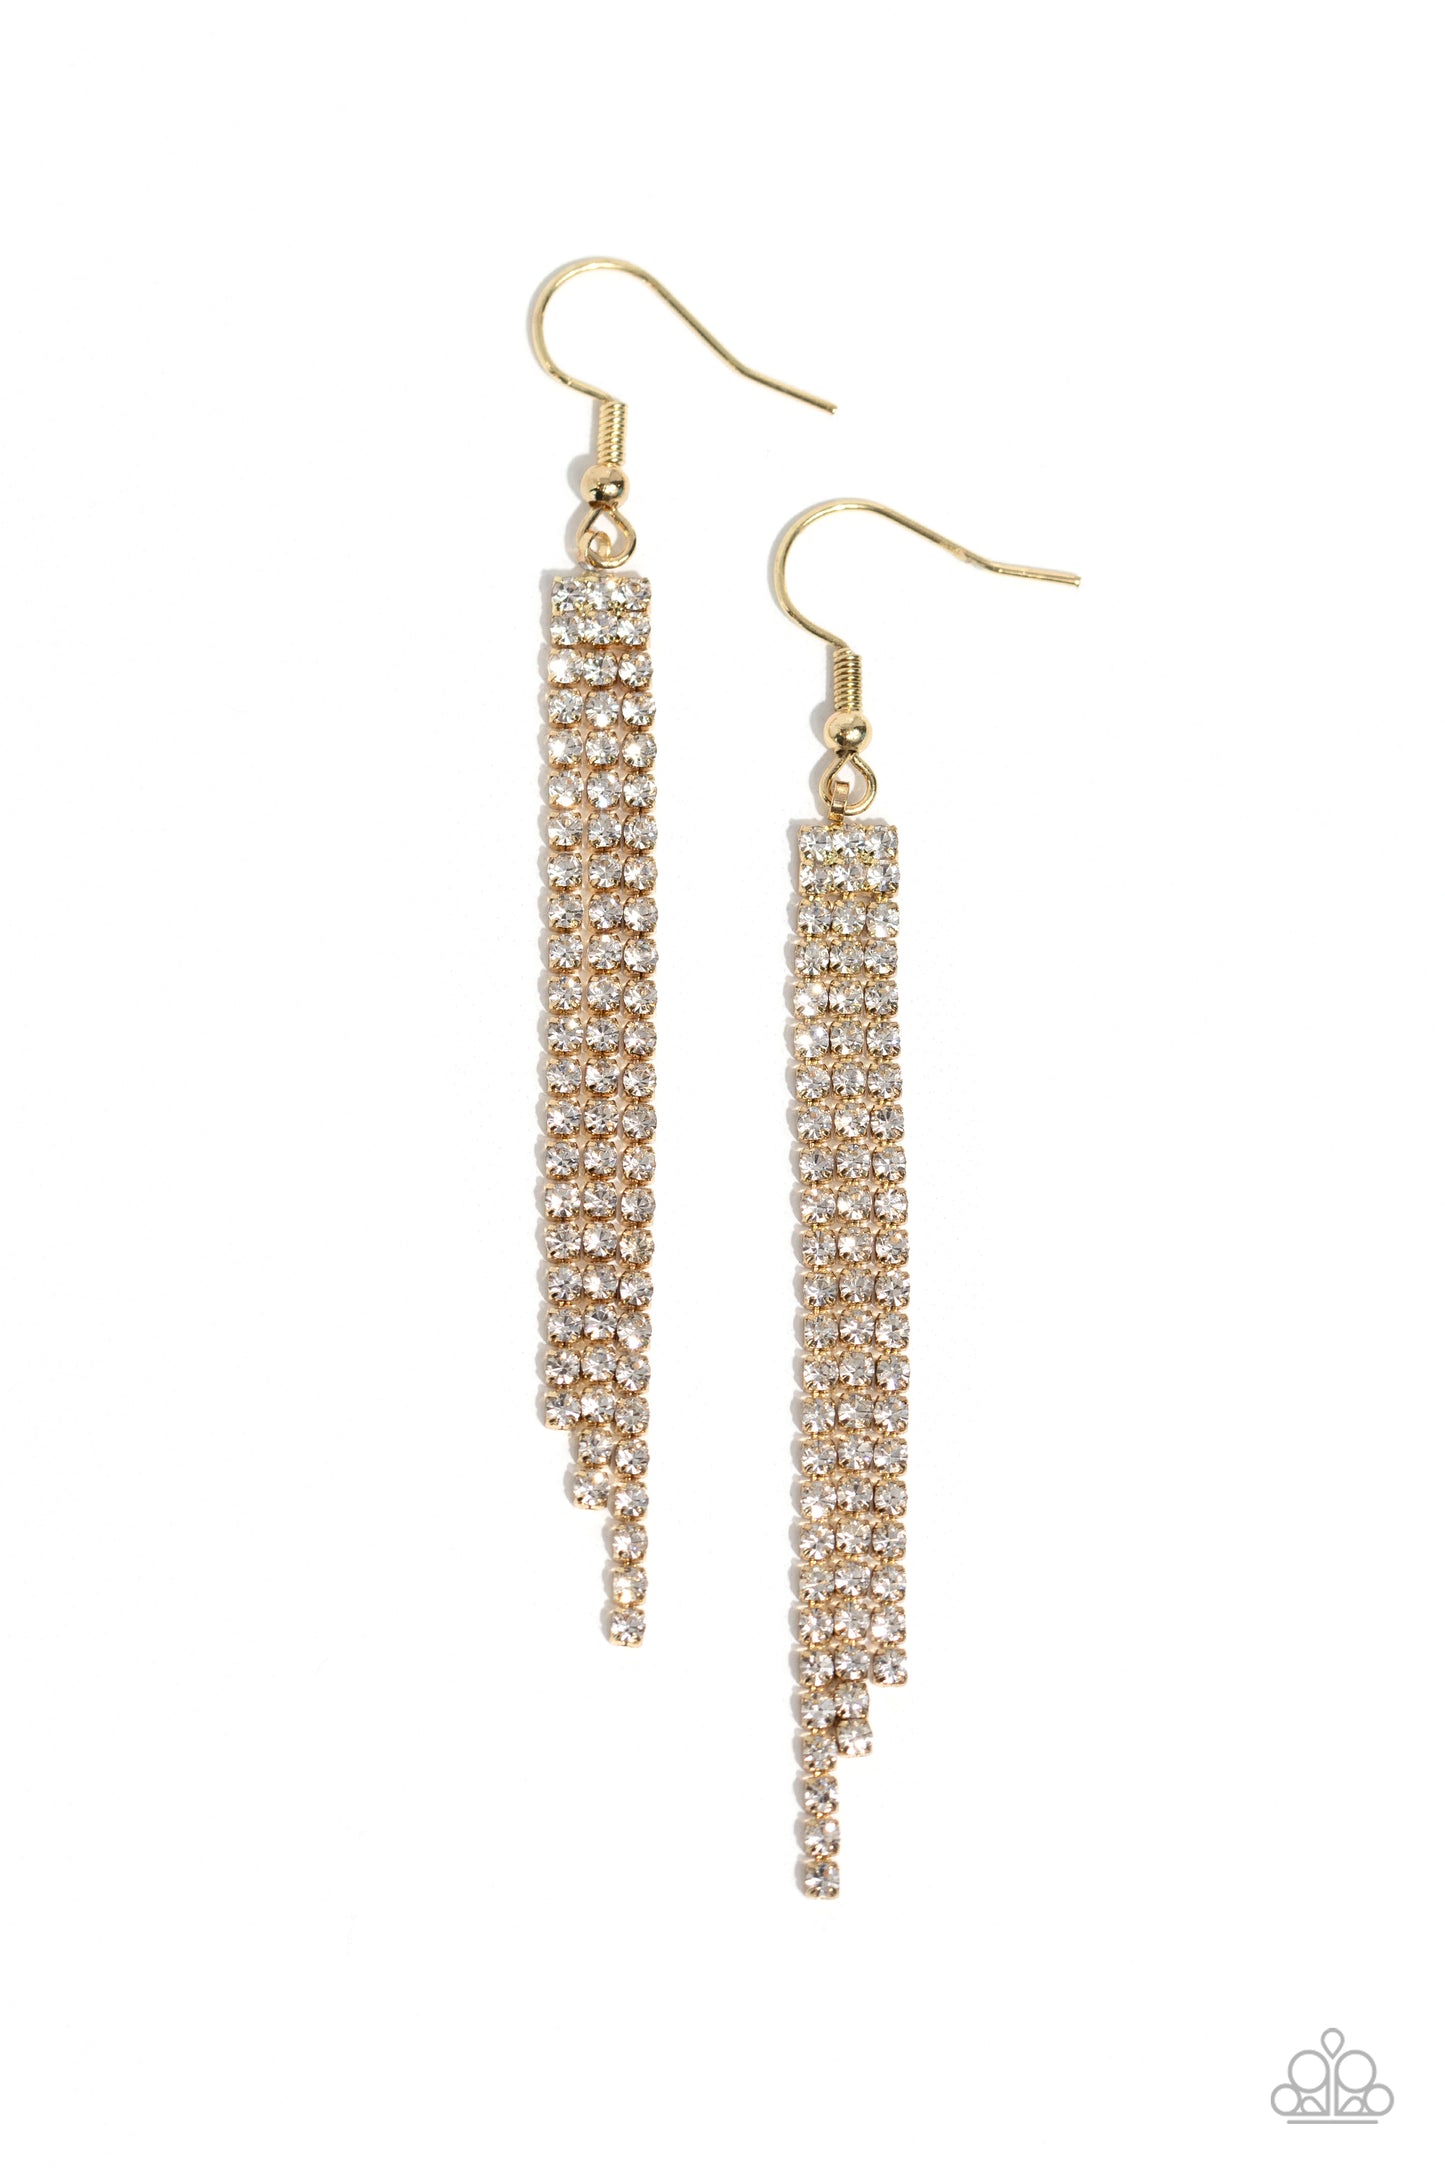 Candescently Couture - Gold Fittings & White Rhinestone Tassel Paparazzi Earrings